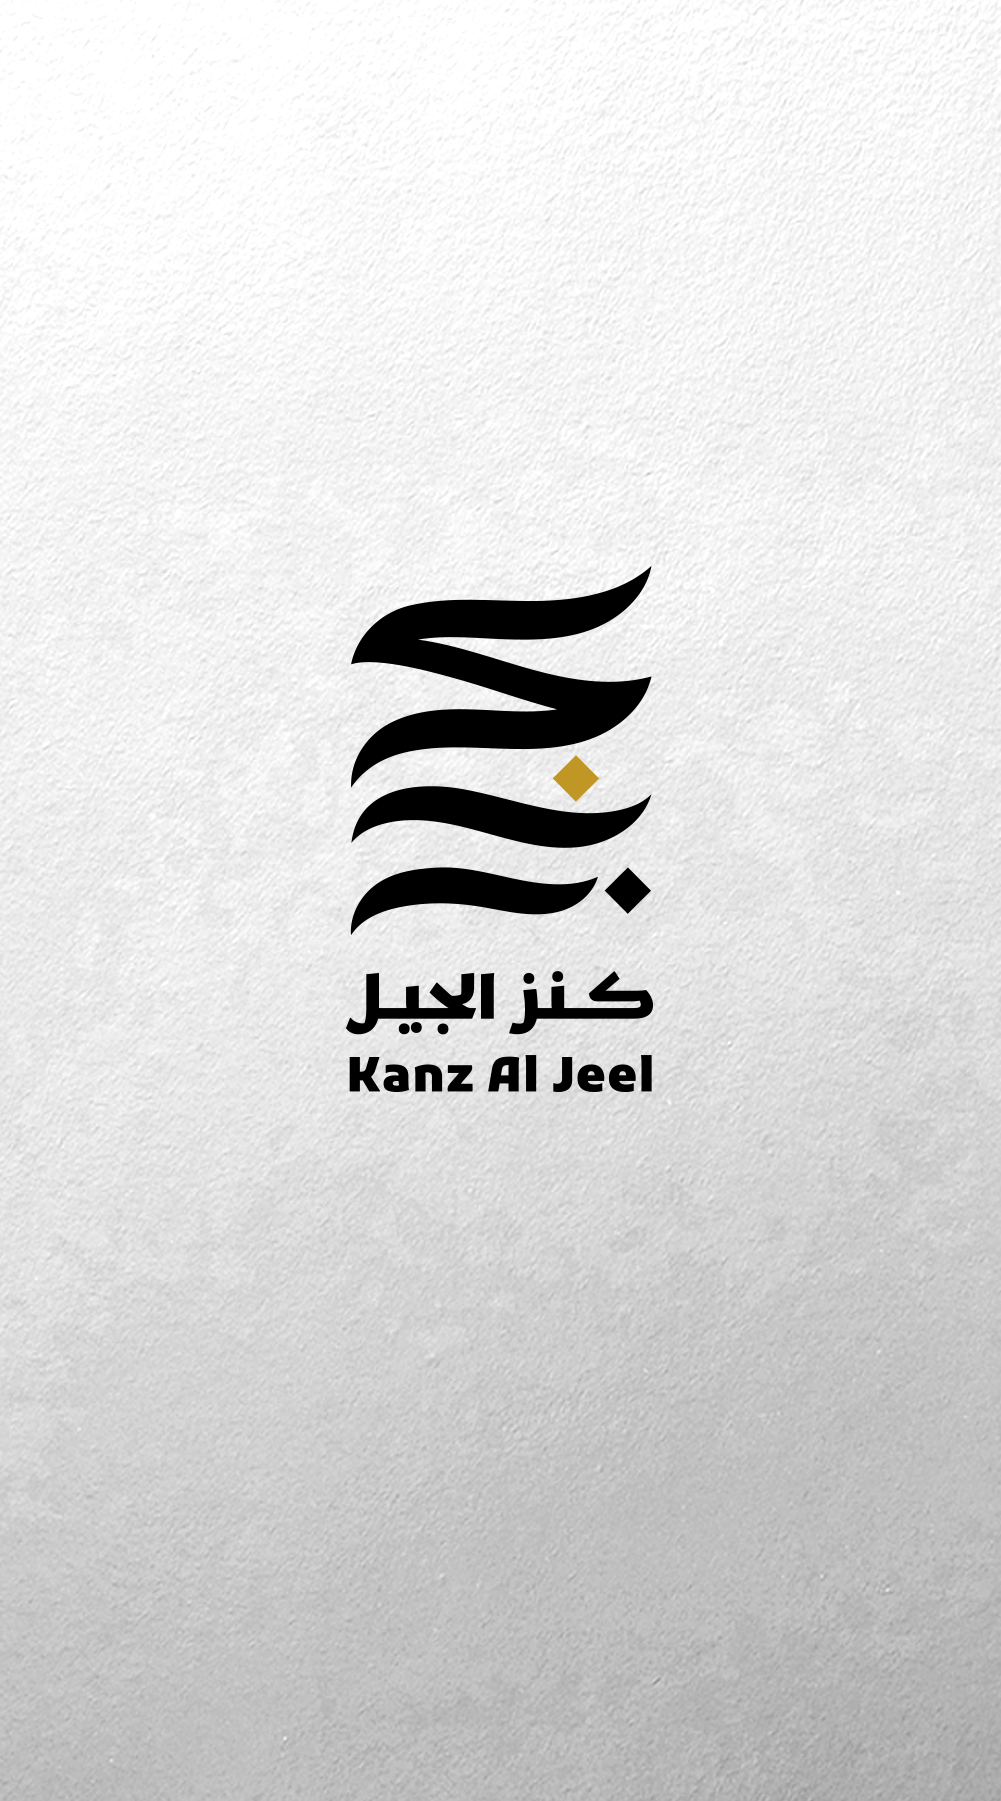 Abu Dhabi Arabic Language Centre Announces Higher Committee of the Third Cycle of the Kanz Al Jeel Award